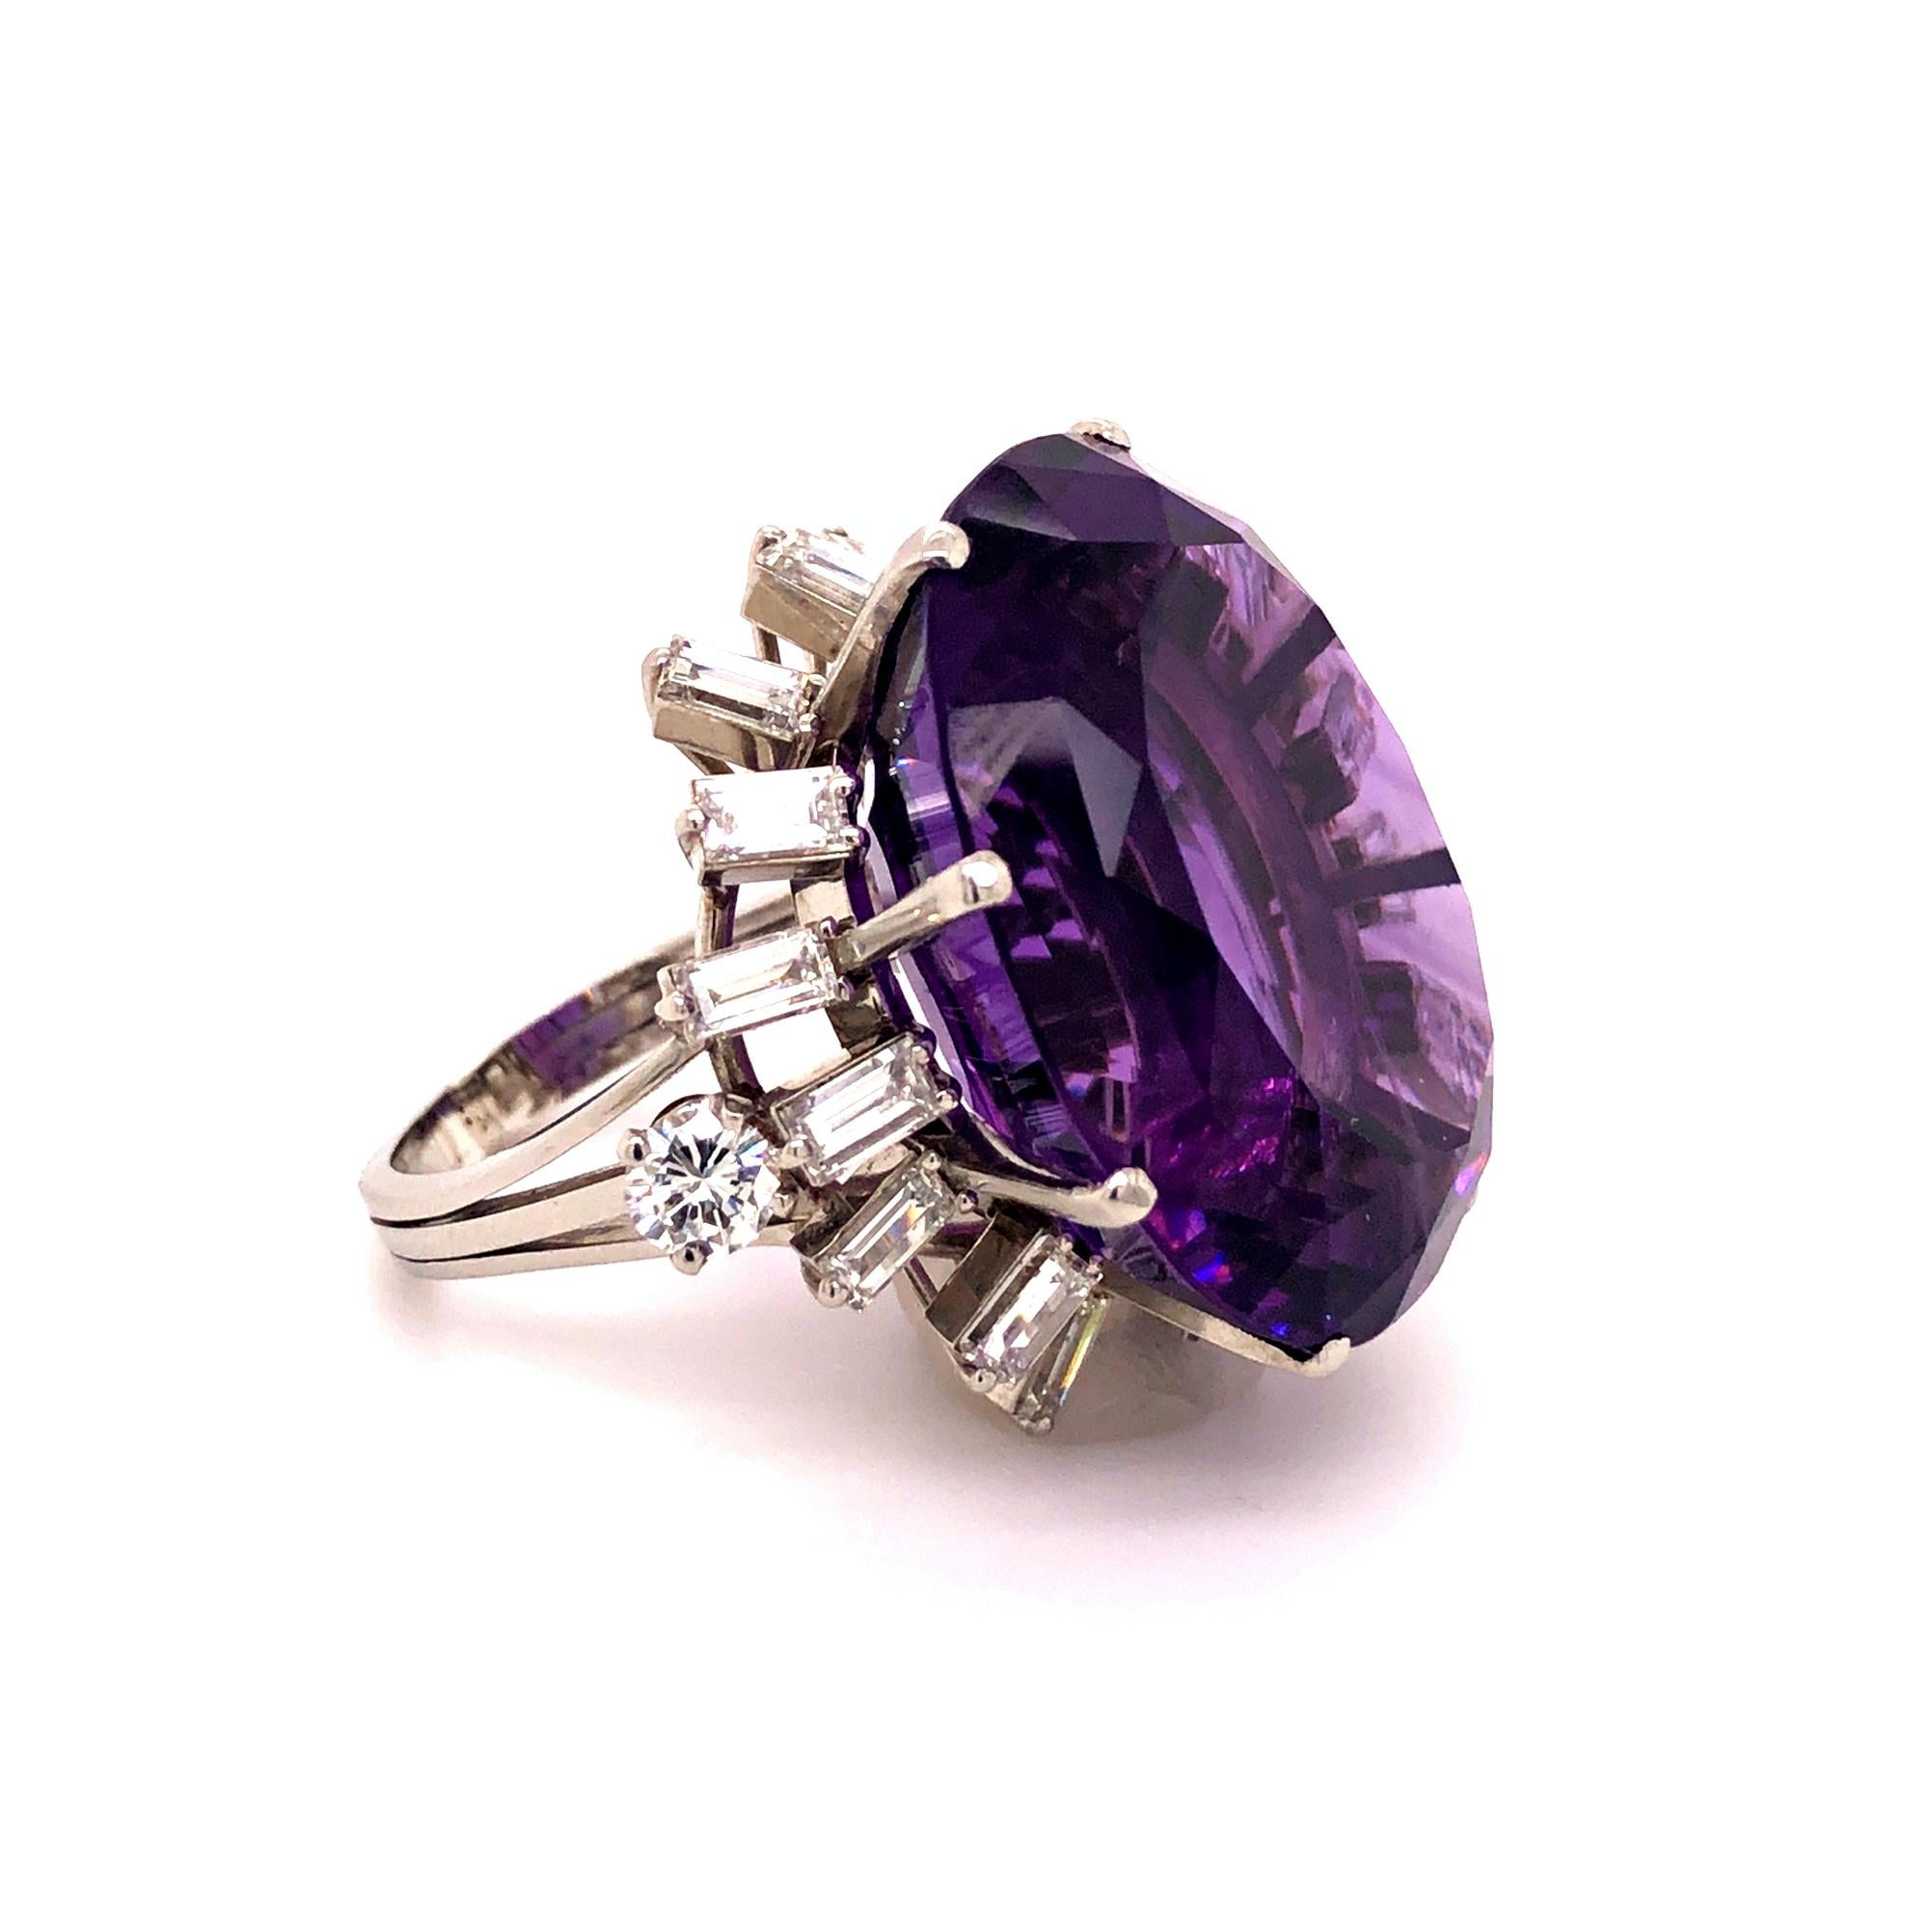 Oval Cut Large Siberian Amethyst and Diamond Cocktail Ring